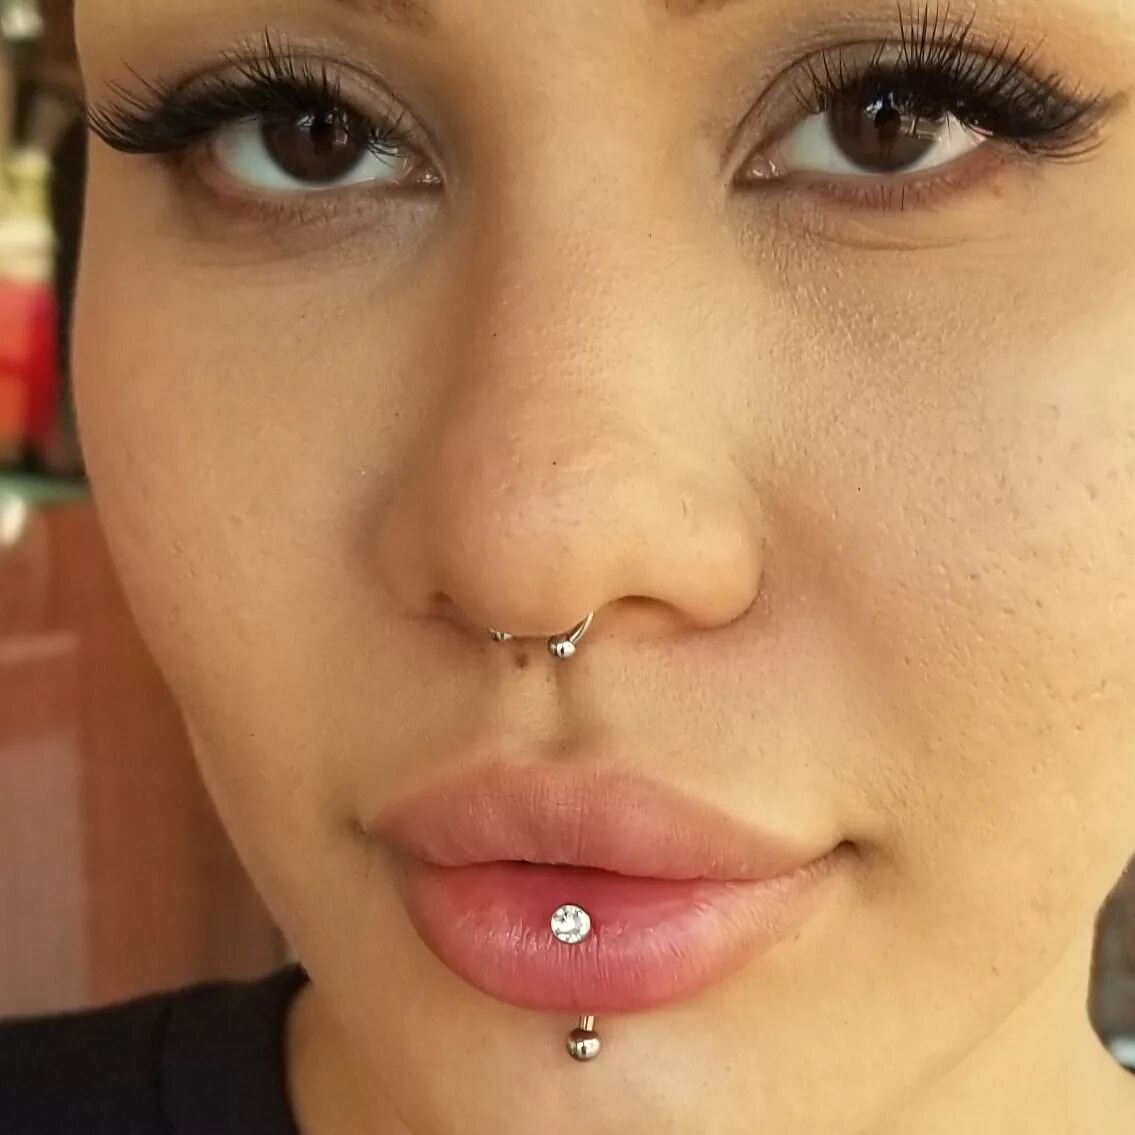 Here's a fresh vertical labret piercing done by Robert  @piercingsbyrobert using titanium jewelry from @leroifinejewellery 

#labret #verticallabret #verticallabretpiercing #labretpiercing #lippiercing #bodyjewelry #bodypiercing #legitbodyjewelry #sa